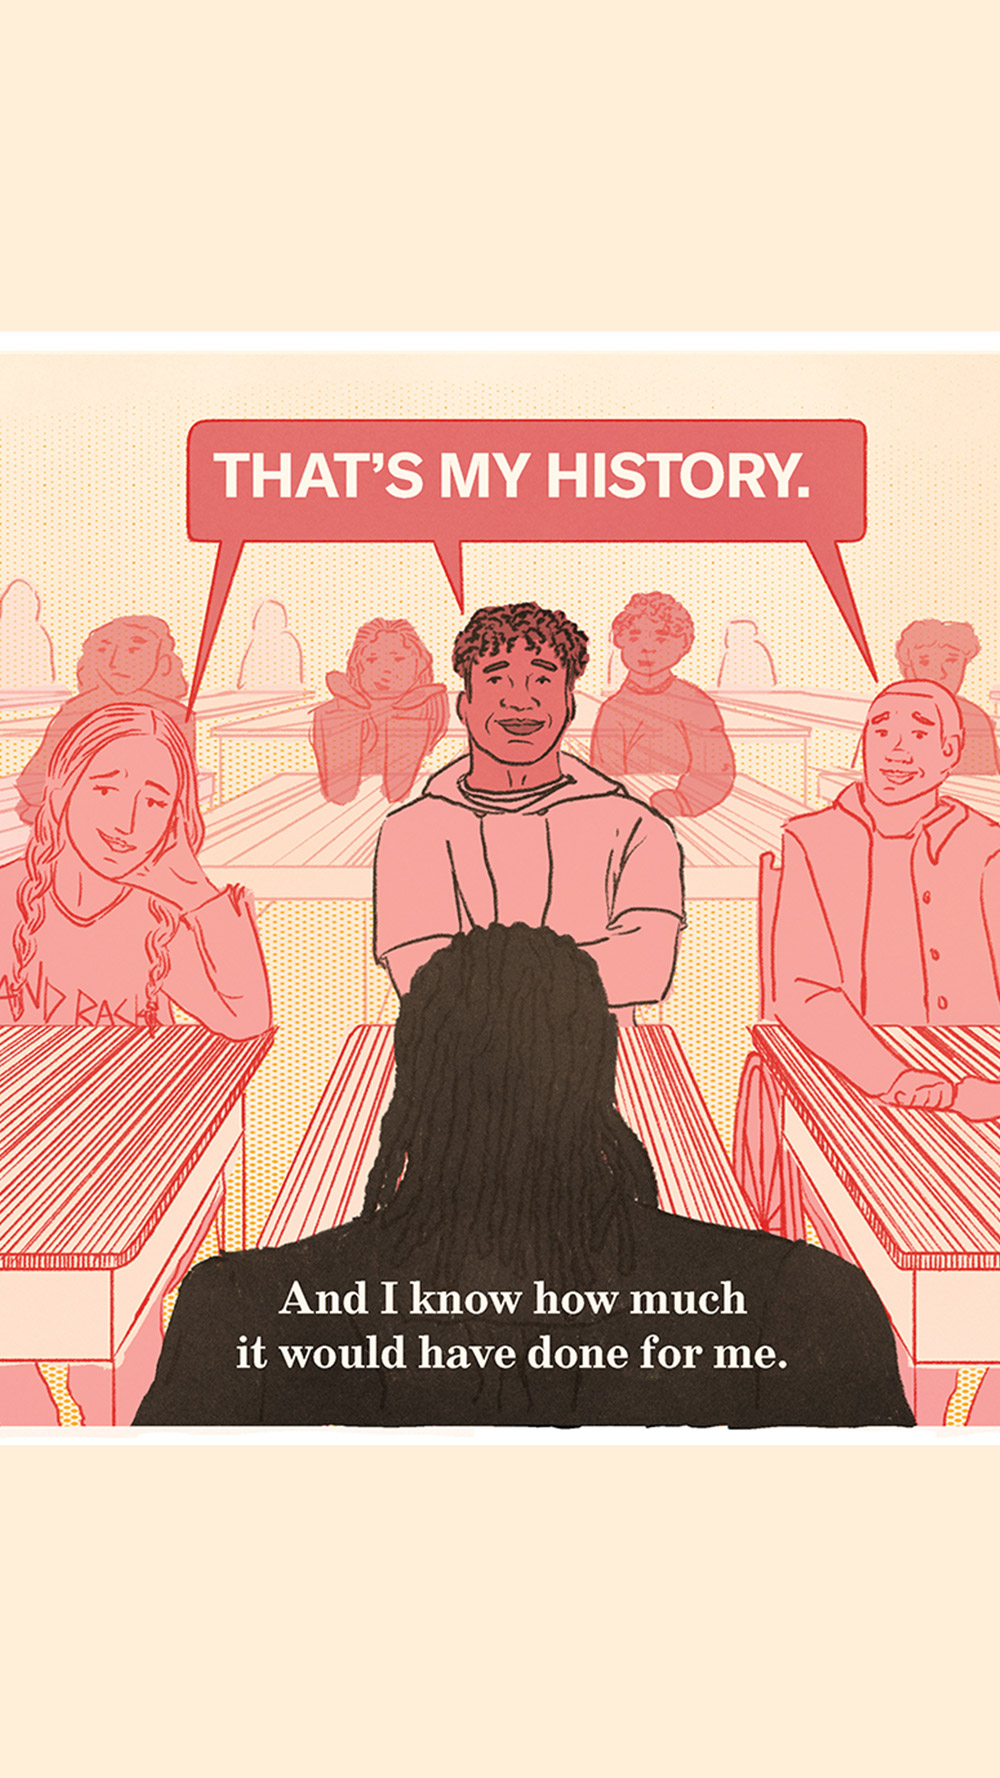 A preview of Eda Uzunlar's comic featuring teacher and activist Anothy Crawford.